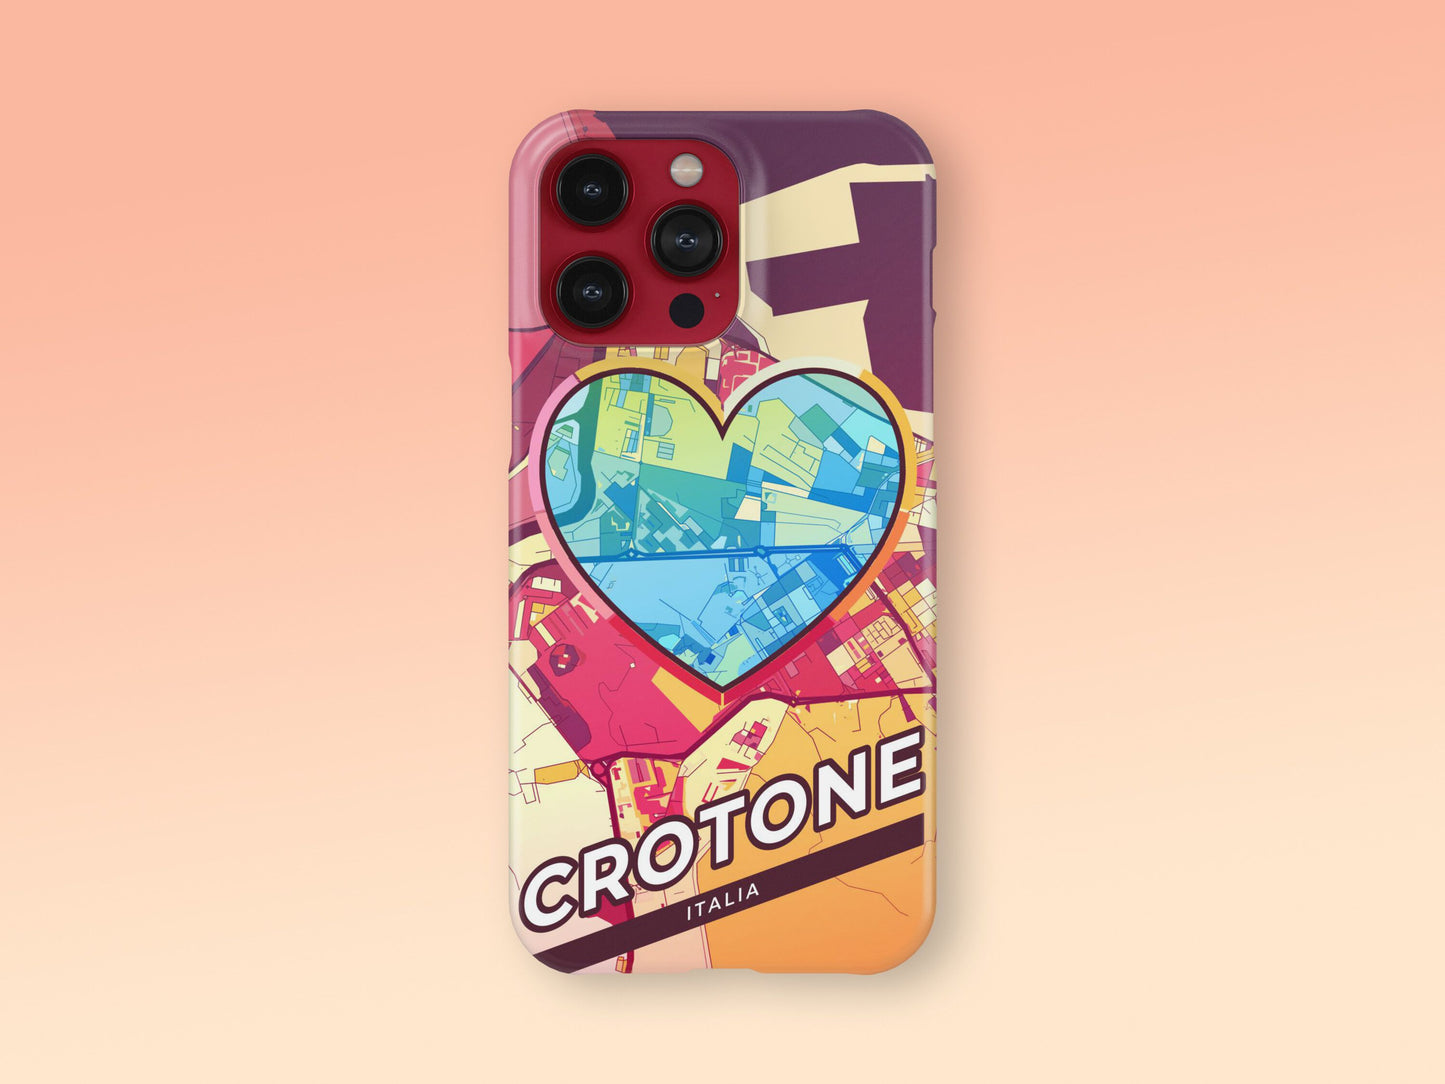 Crotone Italy slim phone case with colorful icon. Birthday, wedding or housewarming gift. Couple match cases. 2